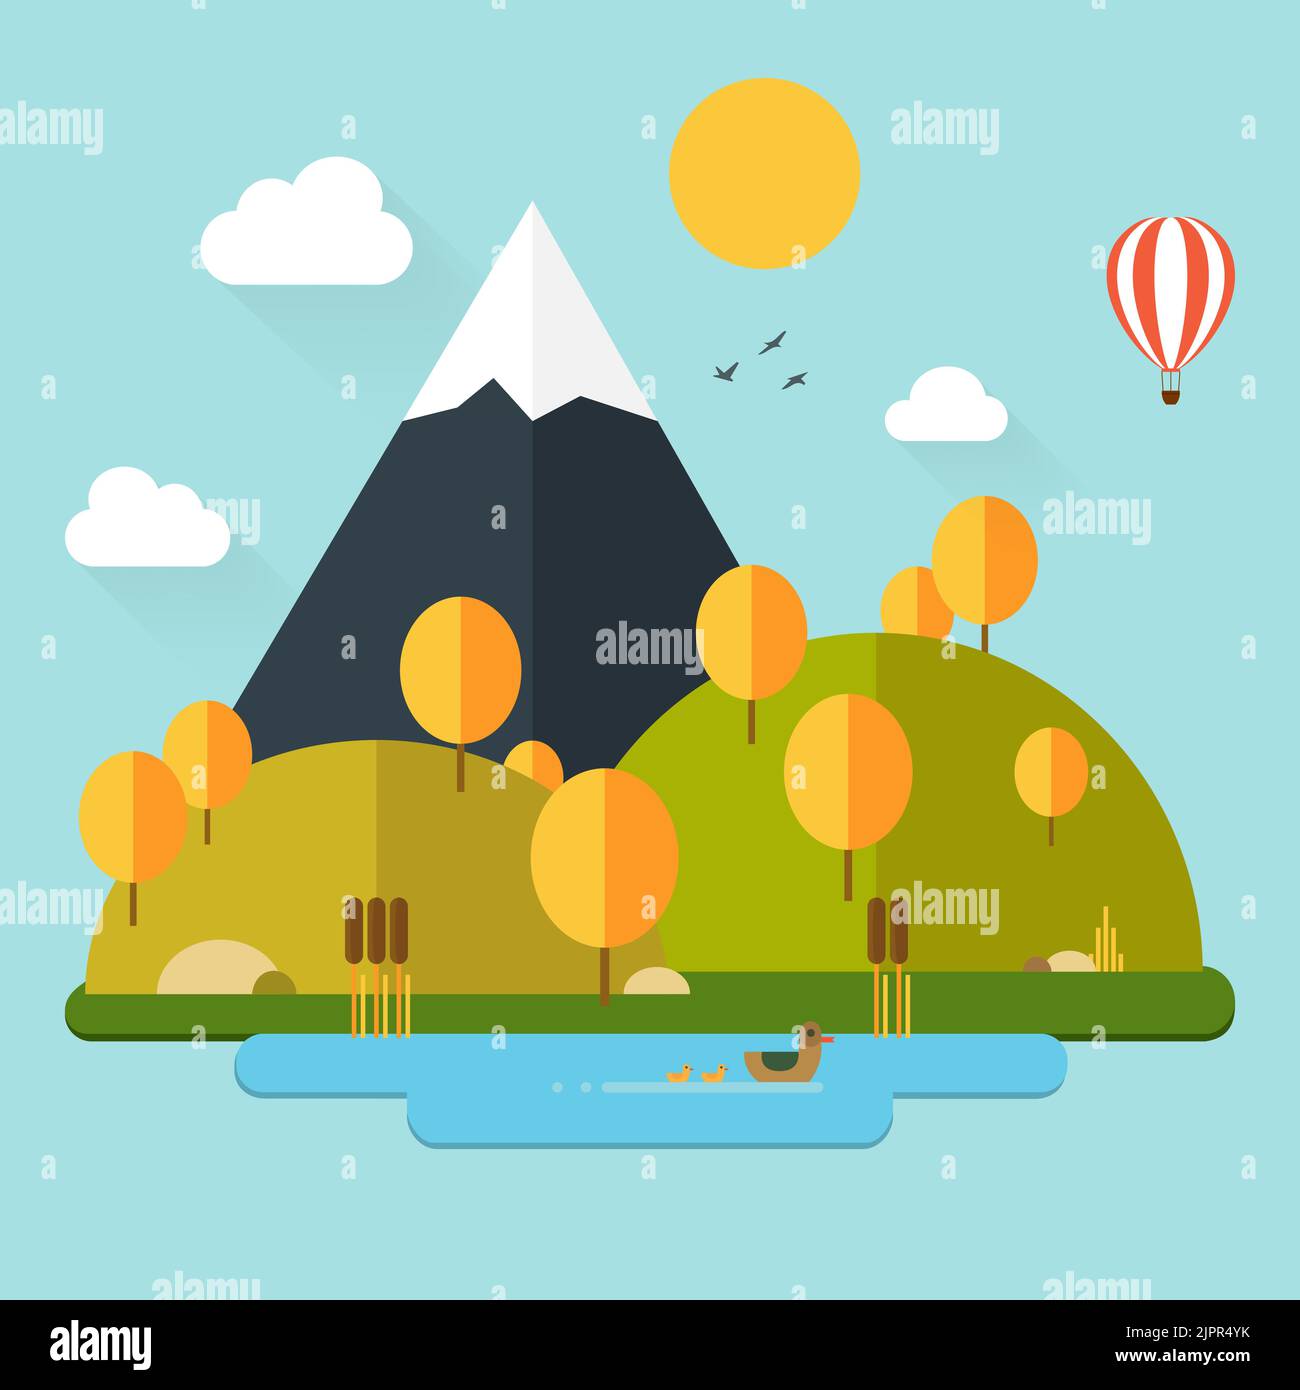 Flat autumn nature landscape illustration in trendy flat design style, eco-friendly. Colorful vector flat nature scene with mountain, lake, ducks, sun Stock Vector